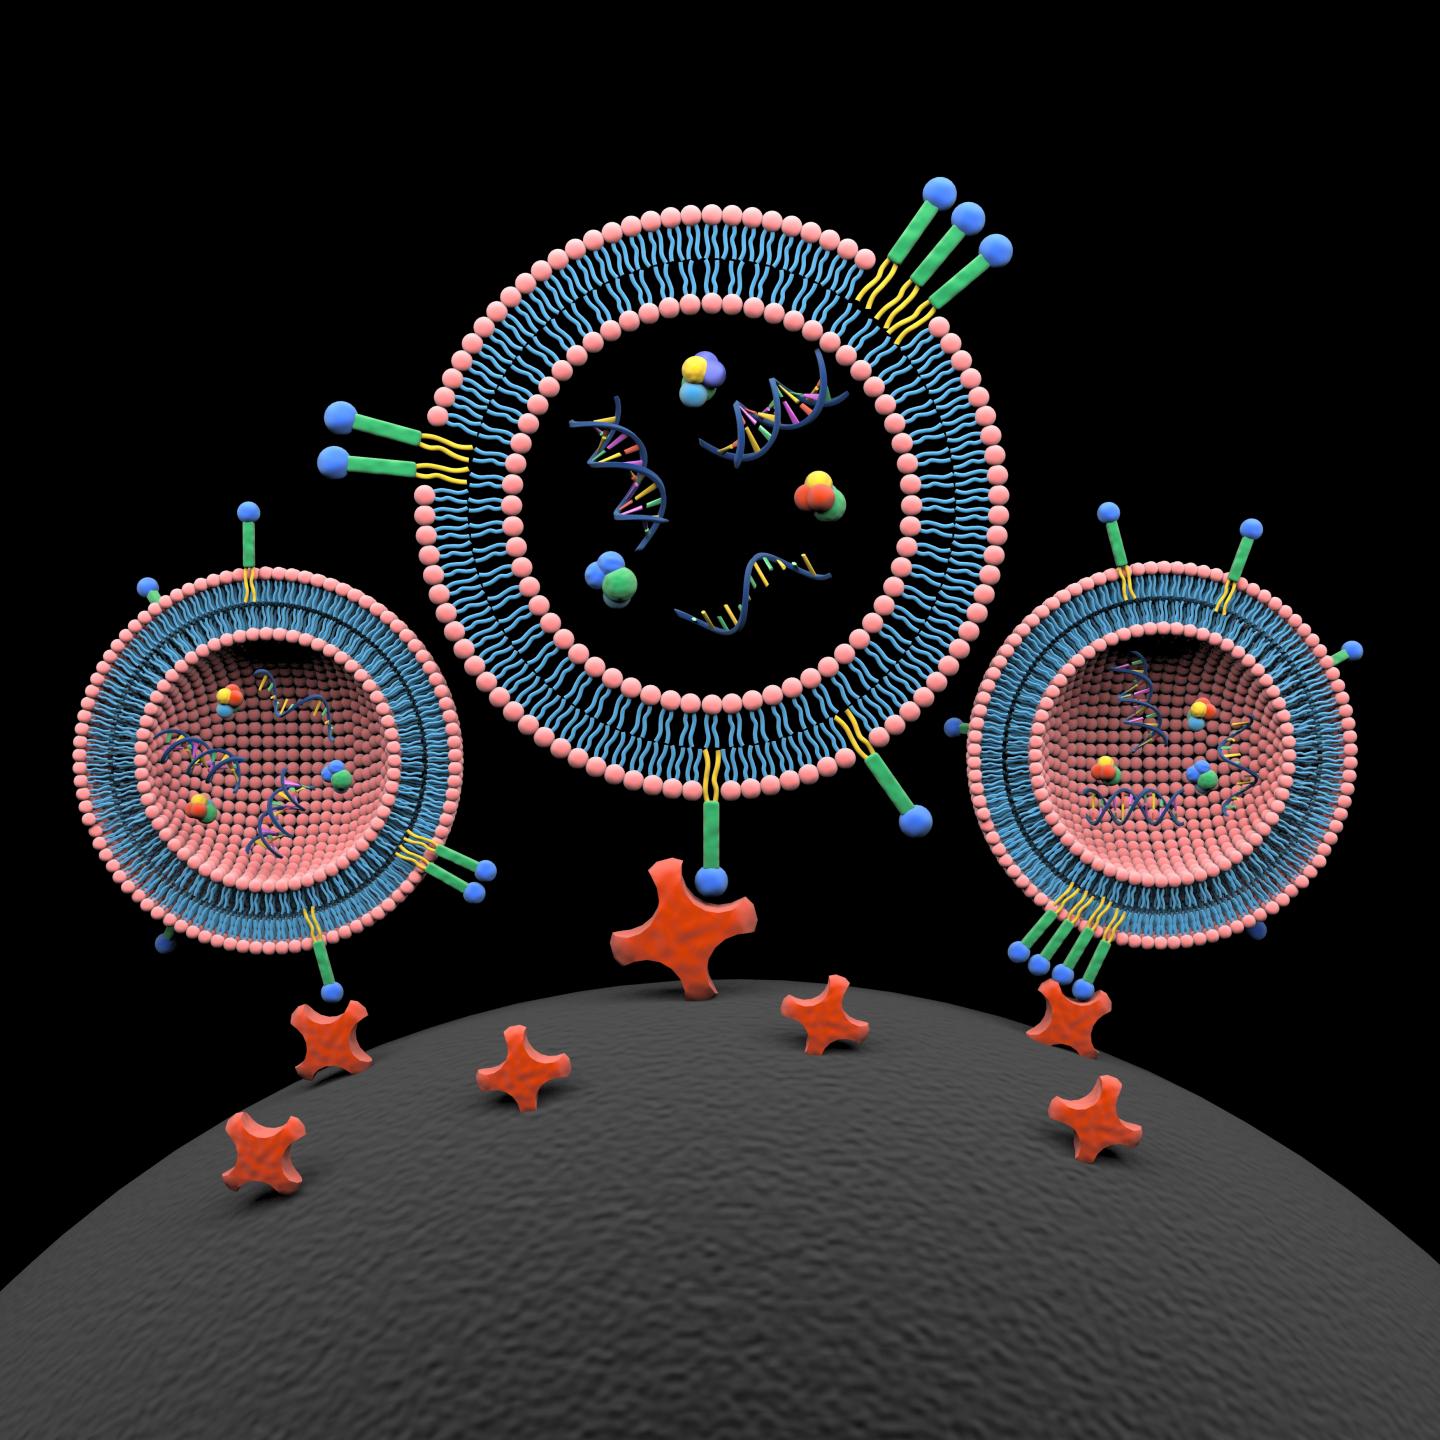 Lipid nanoprobes (blue, green, and yellow) spontaneously insert into lipid bilayer of three extracellular vesicles (EVs). The cargo content of EVs includes proteins, DNA, and RNA. The lipid nanoprobe-labeled EVs are captured onto the surface of a magnetic bead (black, at bottom) through interaction with conjugated avidin molecules (red). Exosome isolation and exosome cargo analysis offer new opportunities for a diverse range of molecular analyses, including mutation detection from blood plasma of cancer patients.[Xin Zou/Penn State]